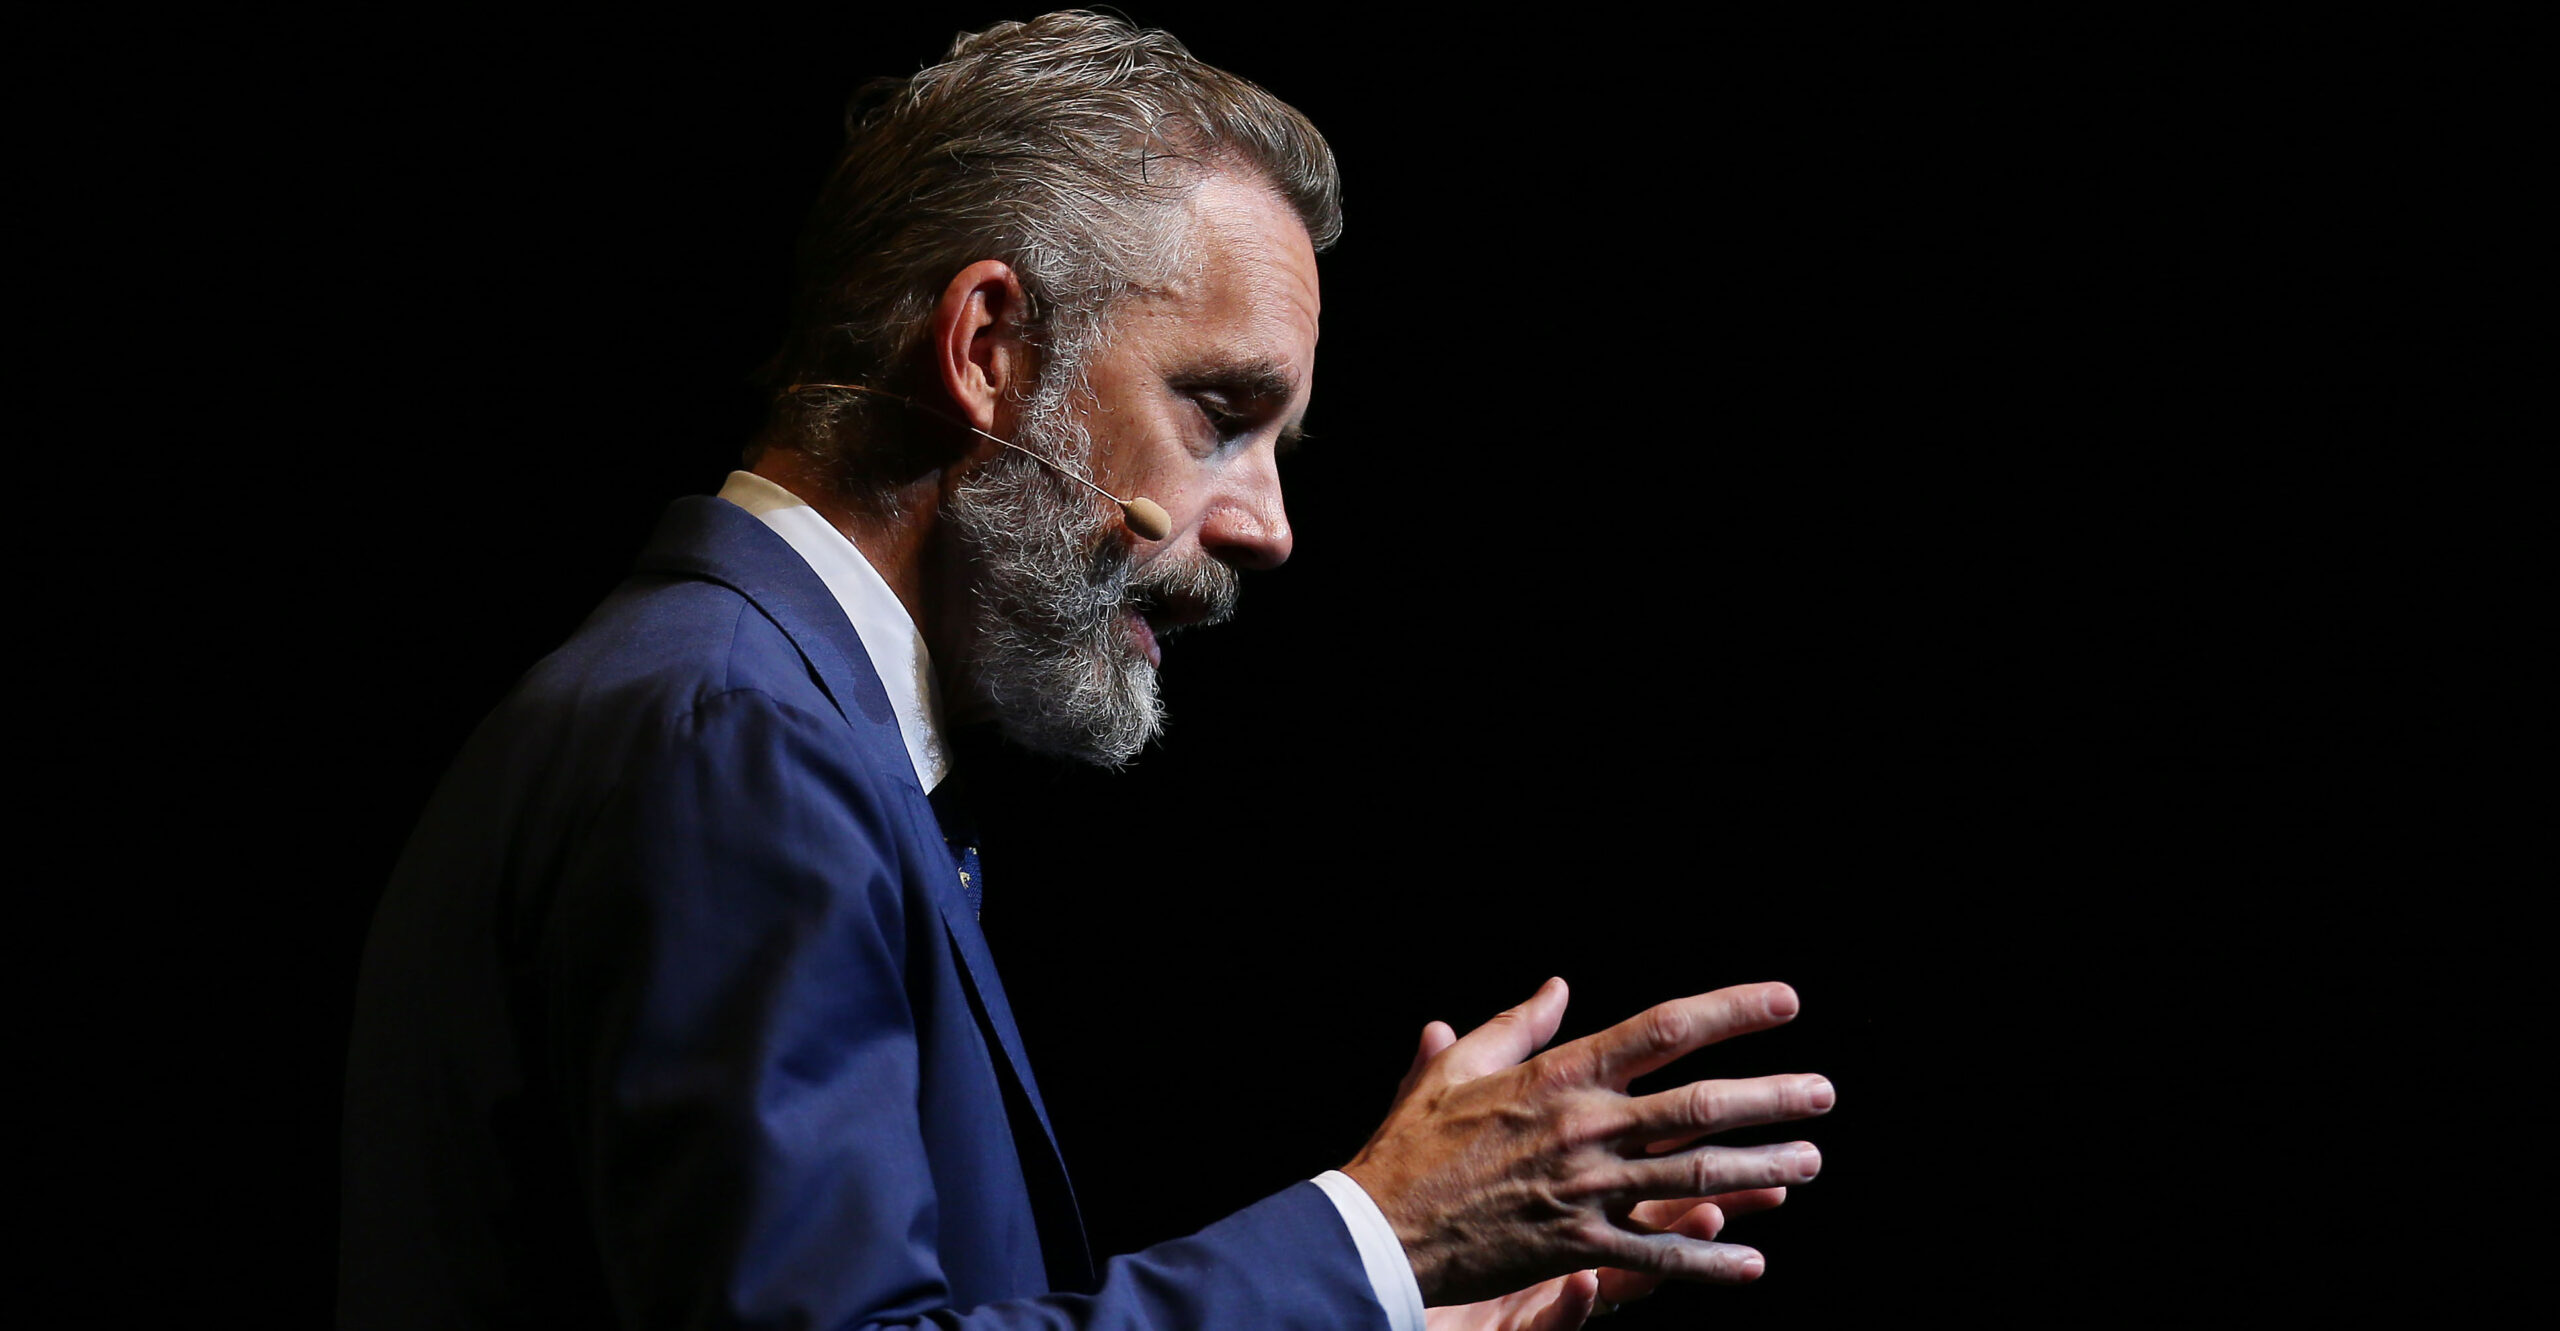 ICYMI: Jordan Peterson: Government-Corporate Collusion 'Threatens Everyone's Freedom Equally'